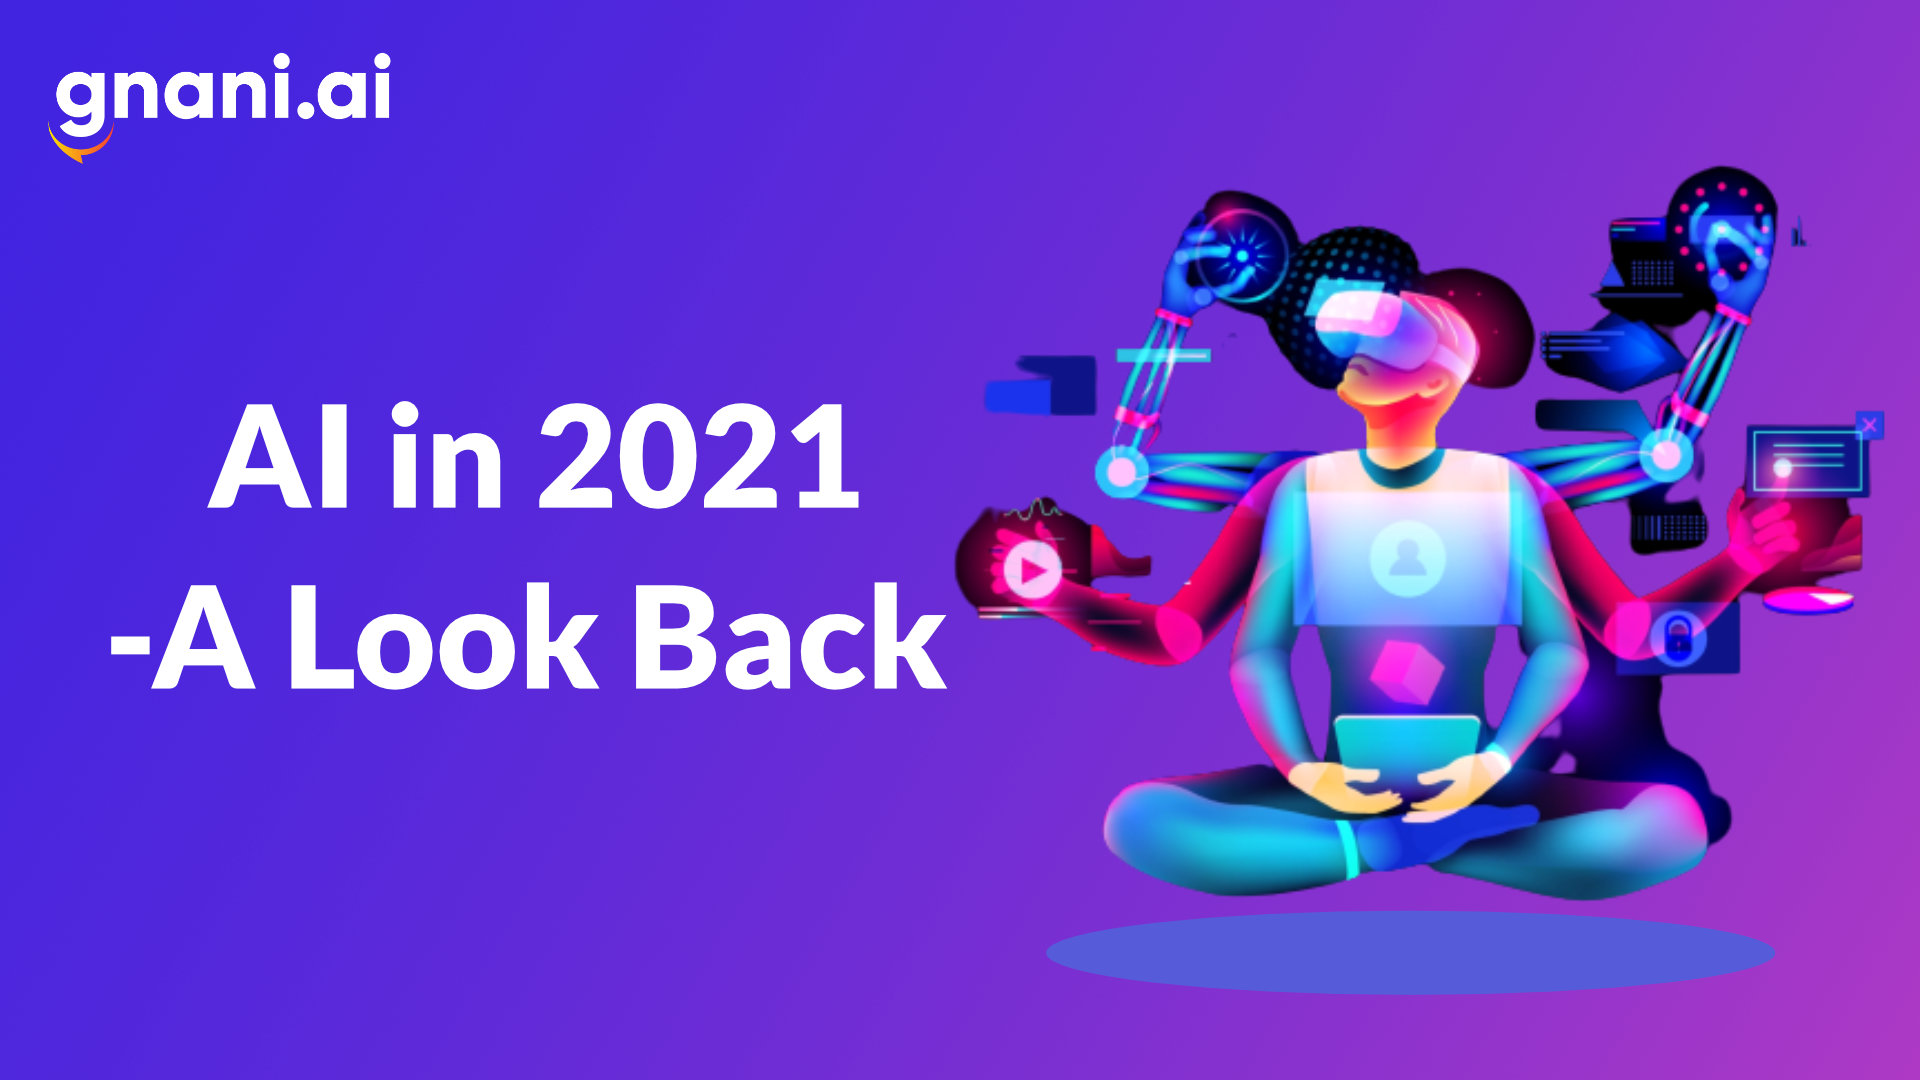 ai in 2021 look back